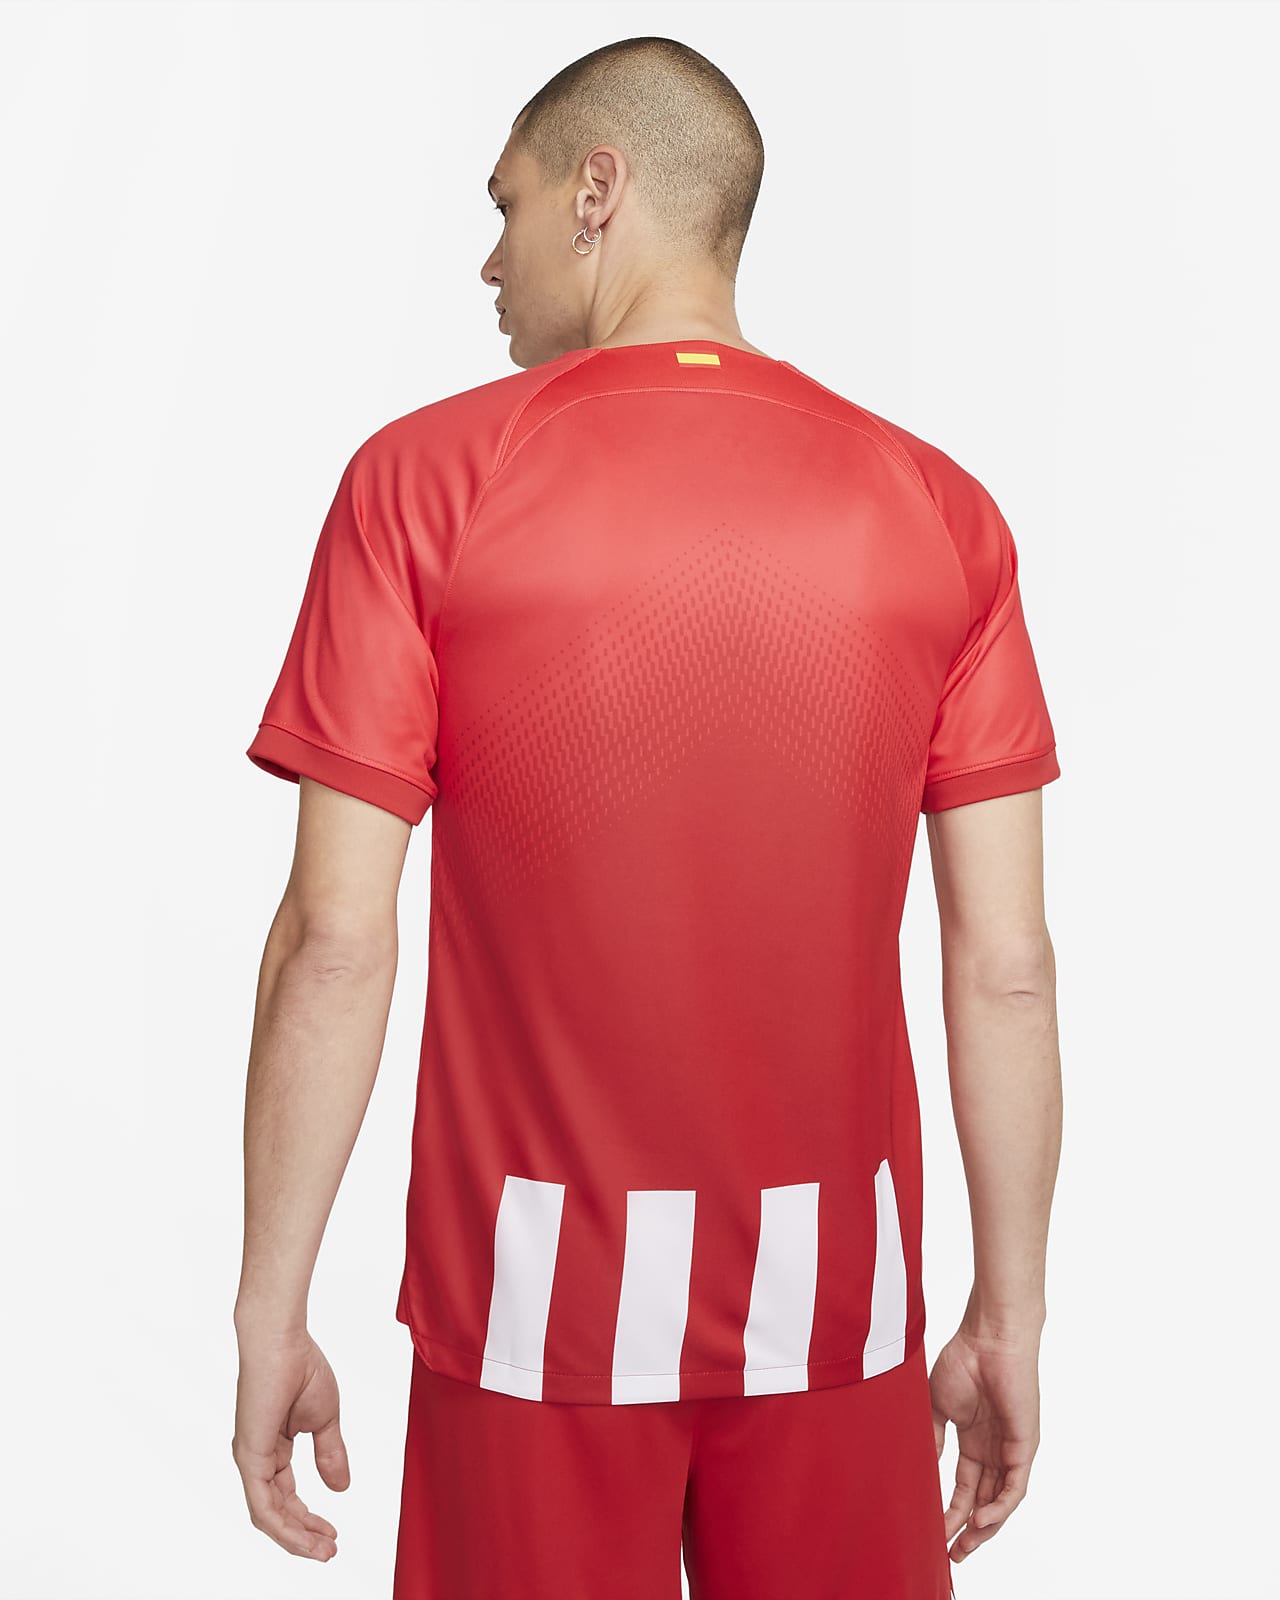 atletico madrid old jersey